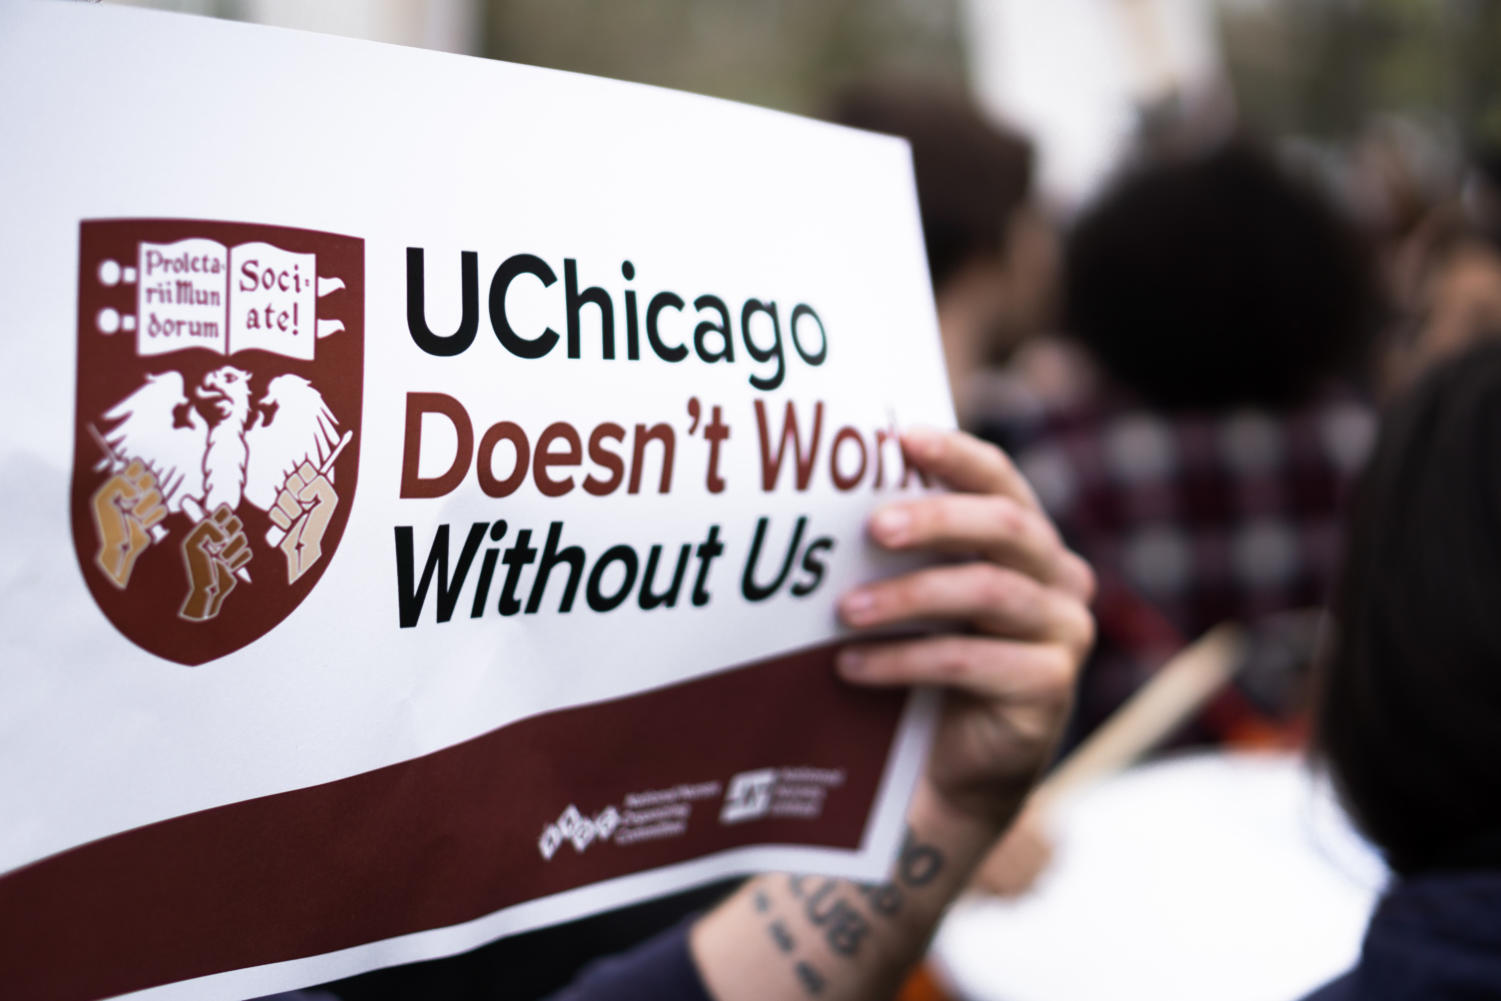 University of Chicago Labor Council members held signs reading: 